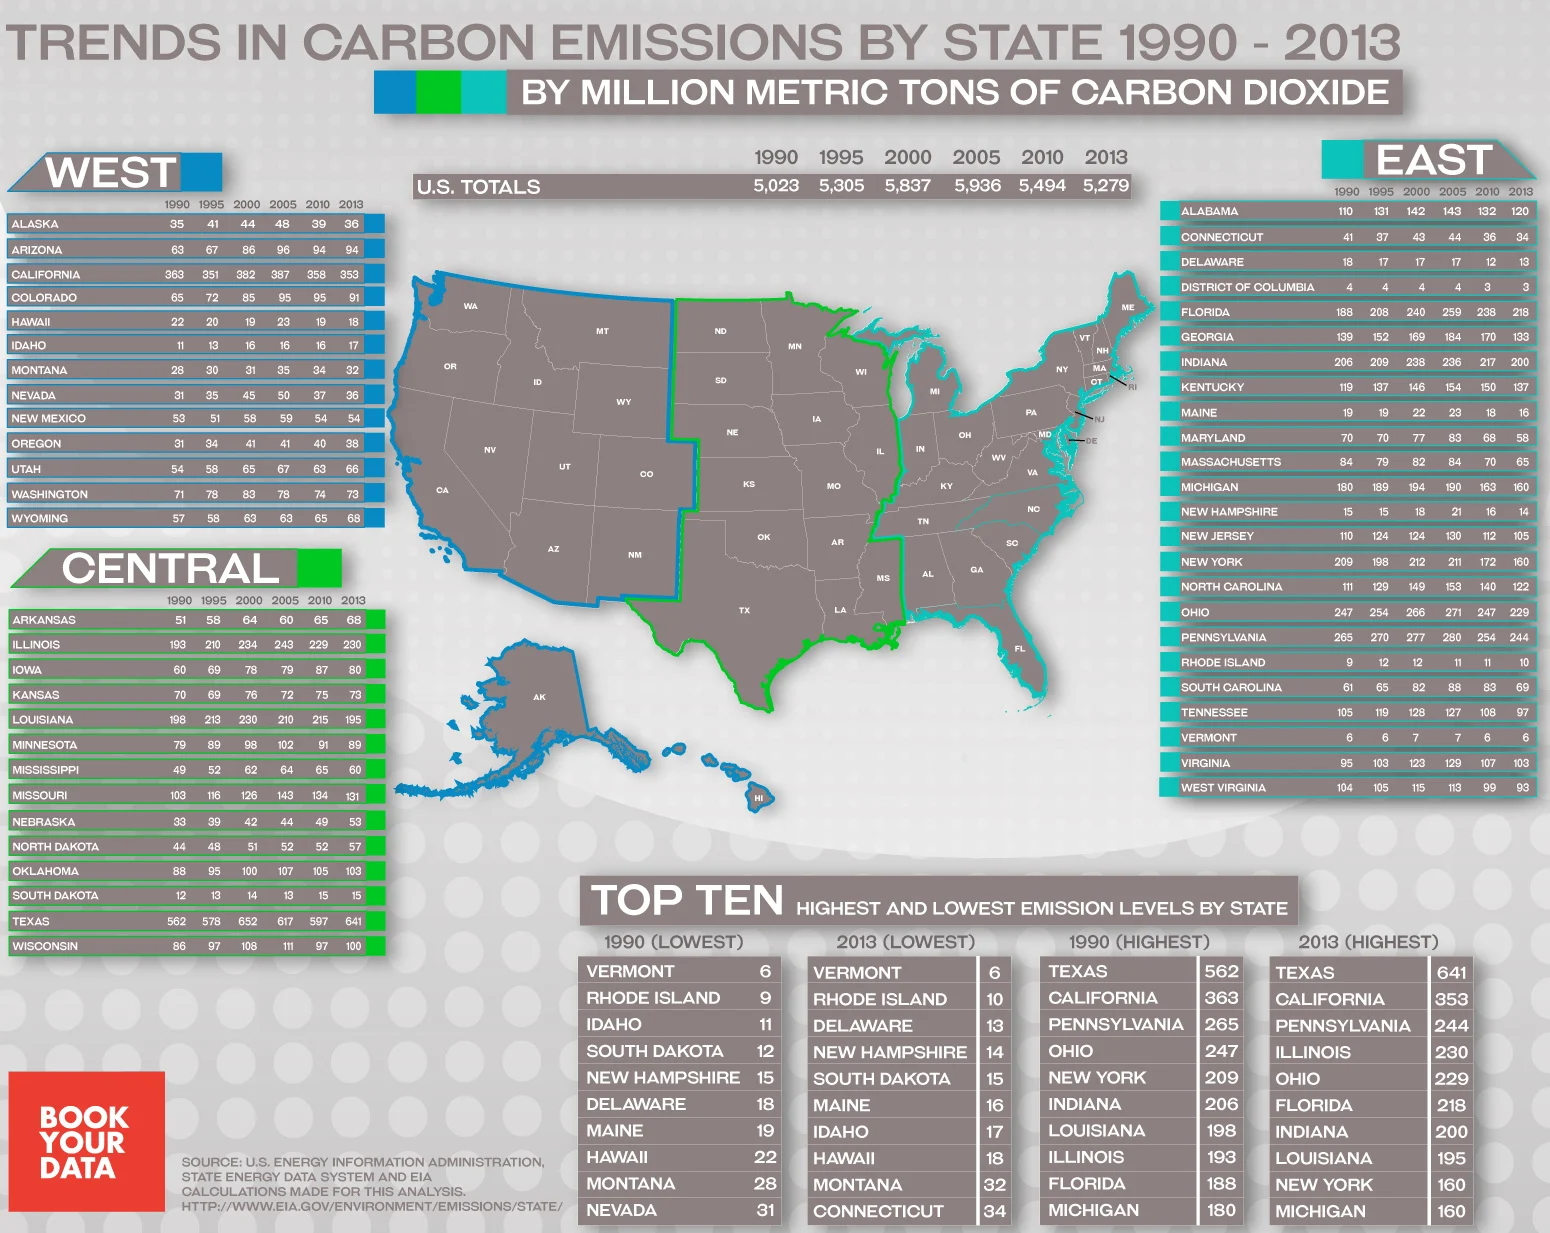 Trends in carbon emissions by state (1990 - 2013)